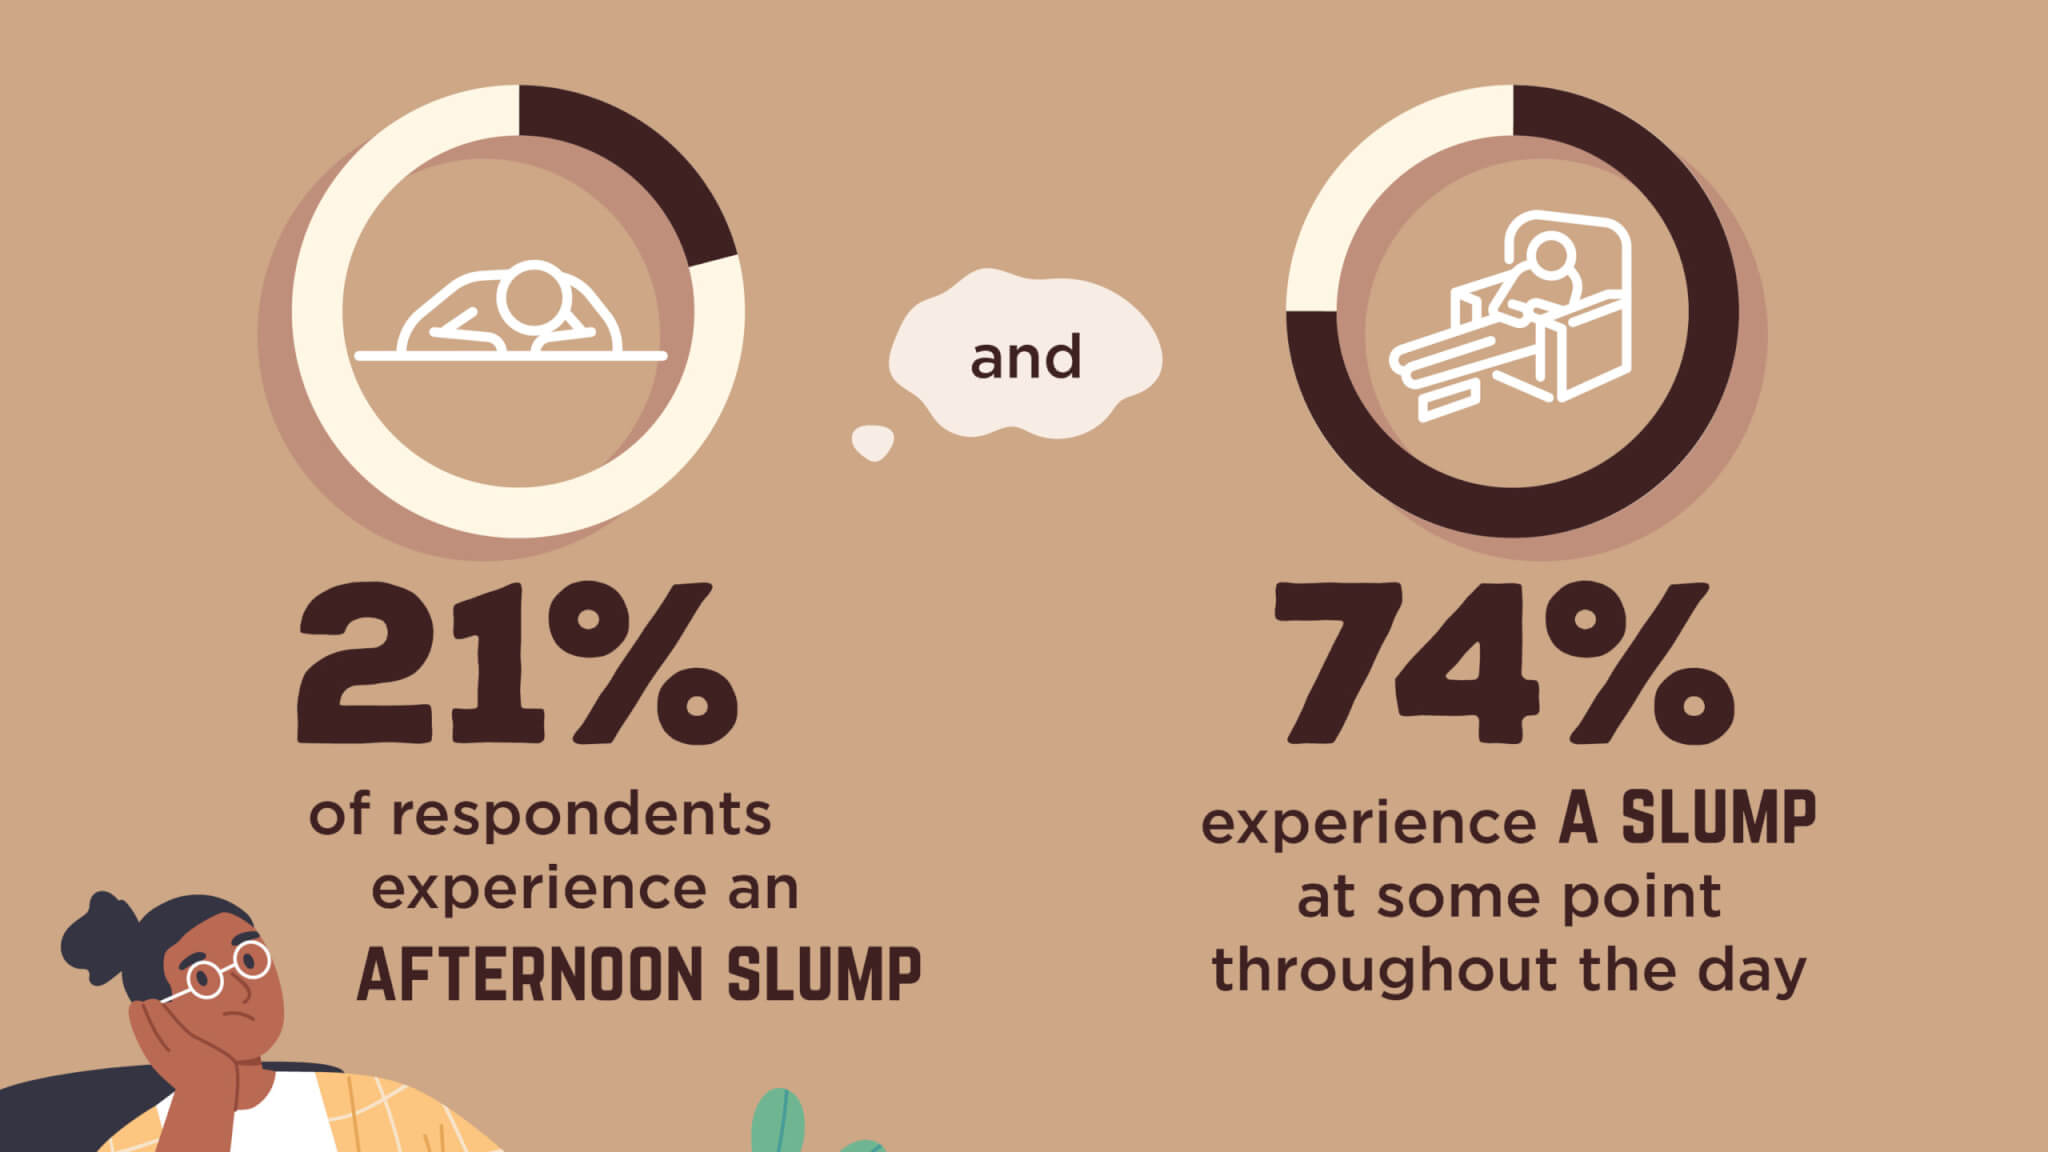 Infographic on afternoon slump